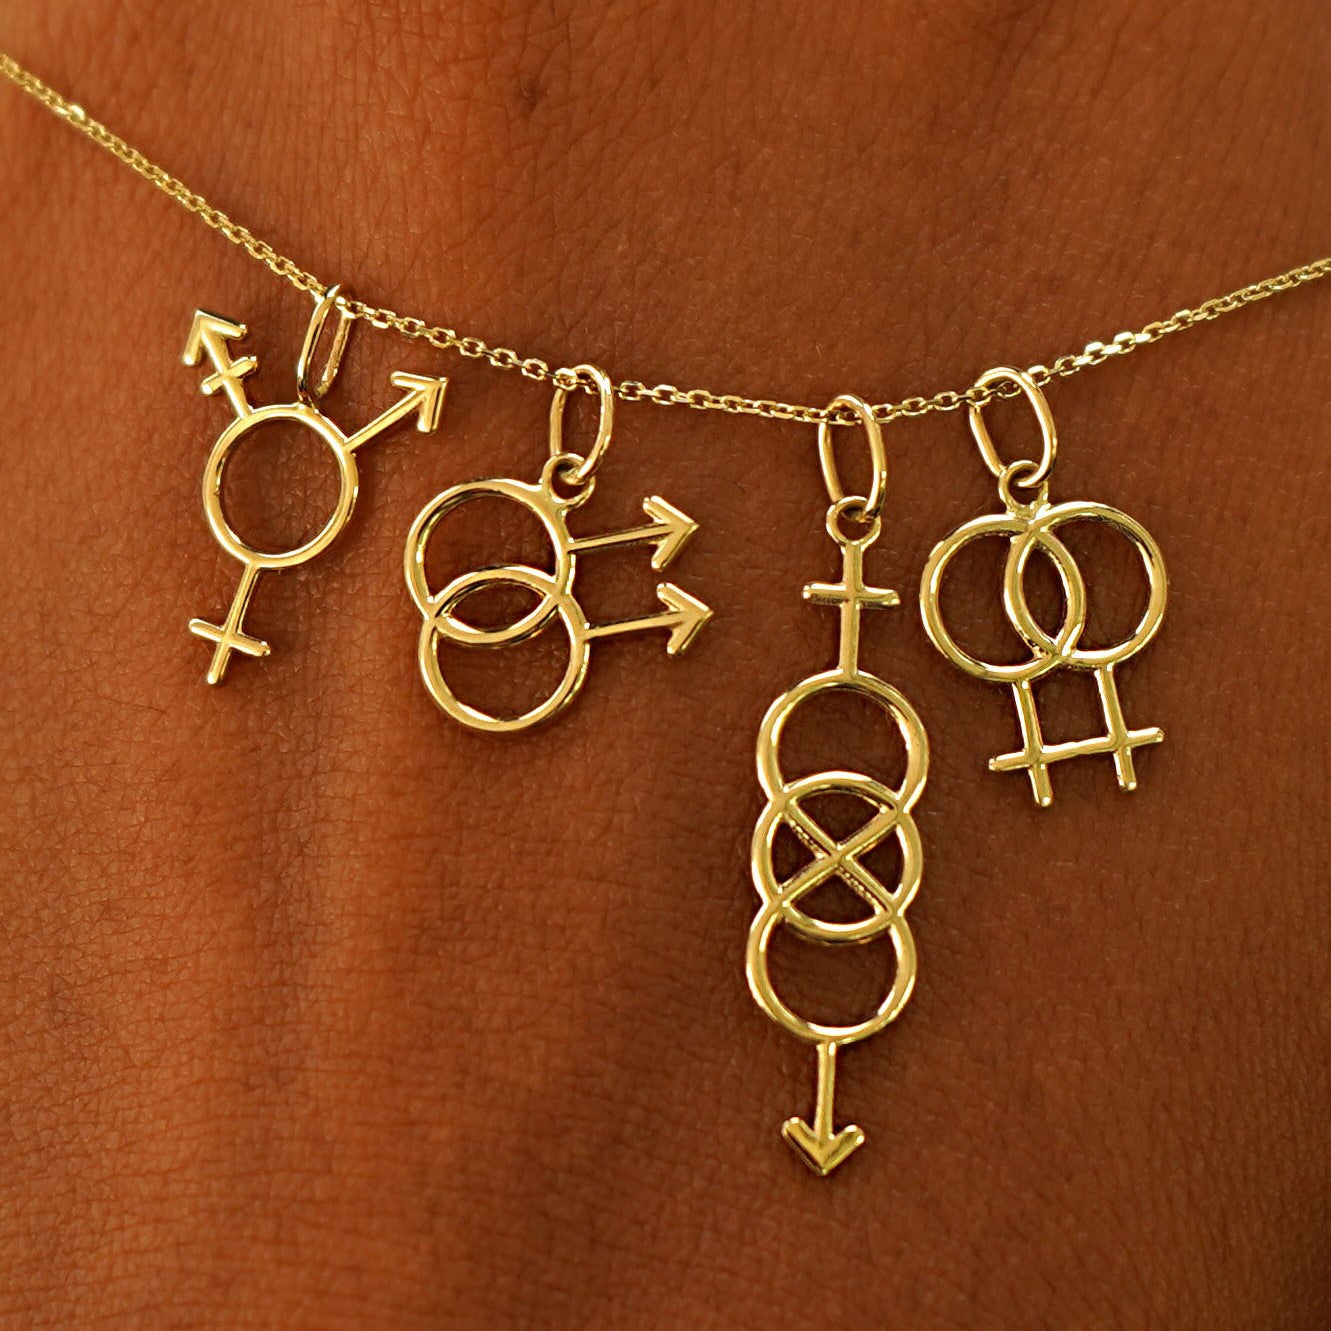 A model's wrist wearing yellow gold Transgender, Gay, Bisexual, and Lesbian Symbol Charms on a Cable Bracelet